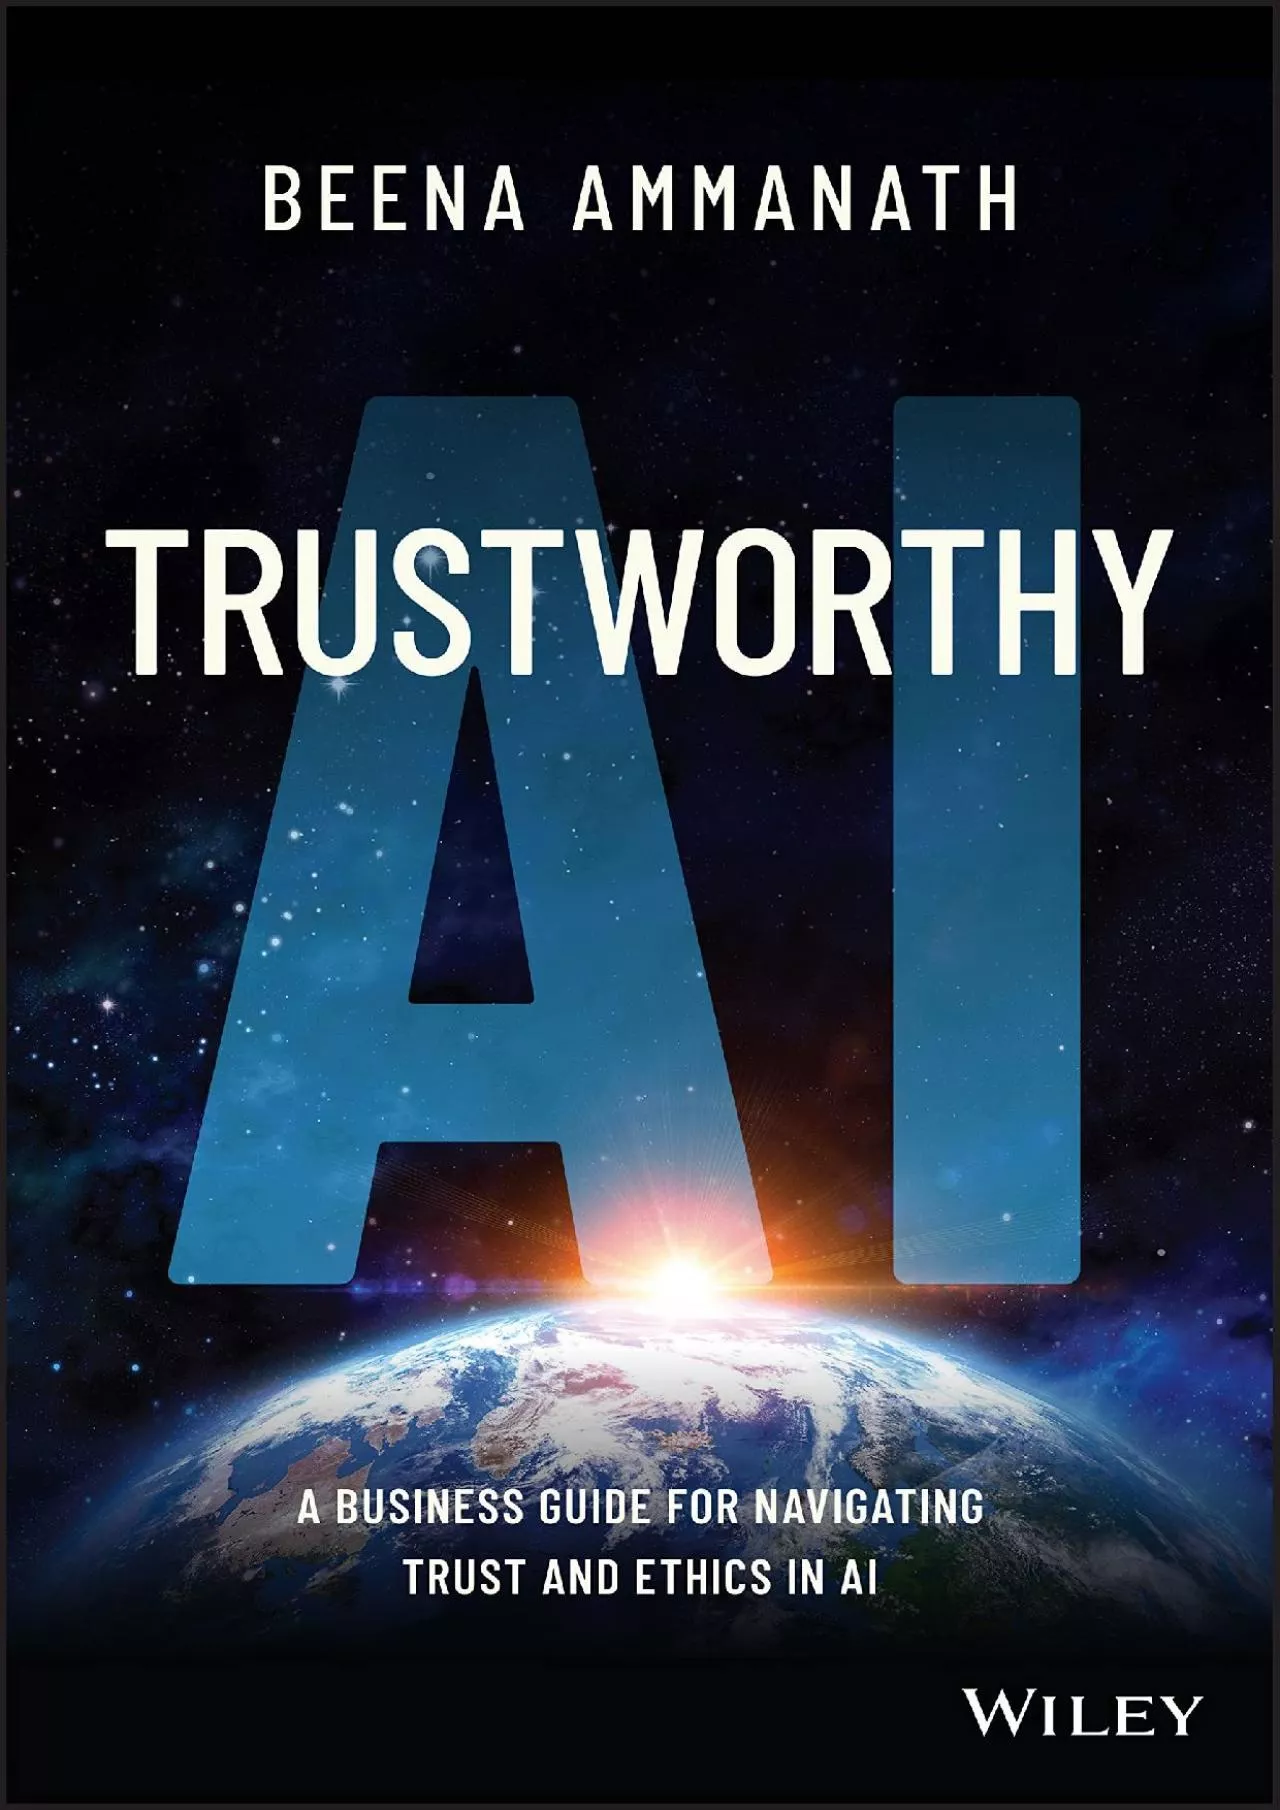 (EBOOK)-Trustworthy AI: A Business Guide for Navigating Trust and Ethics in AI